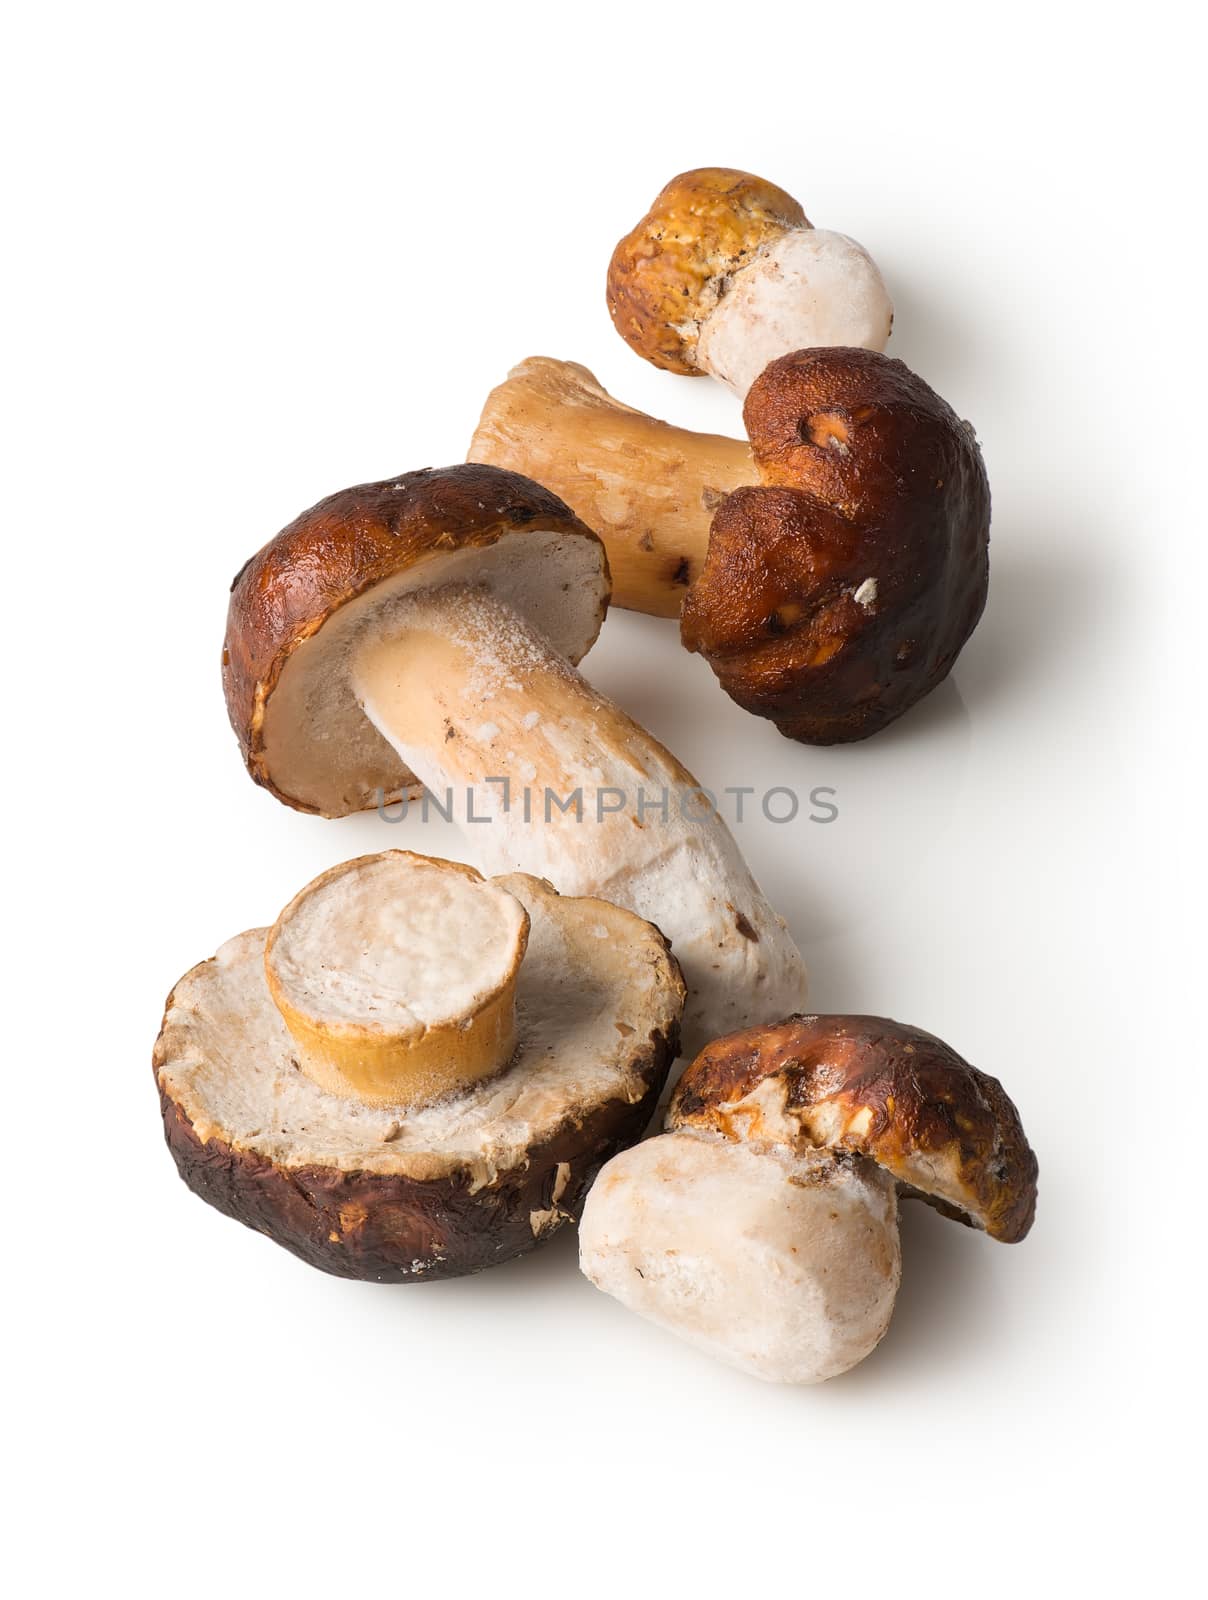 White mushrooms isolated on a white background